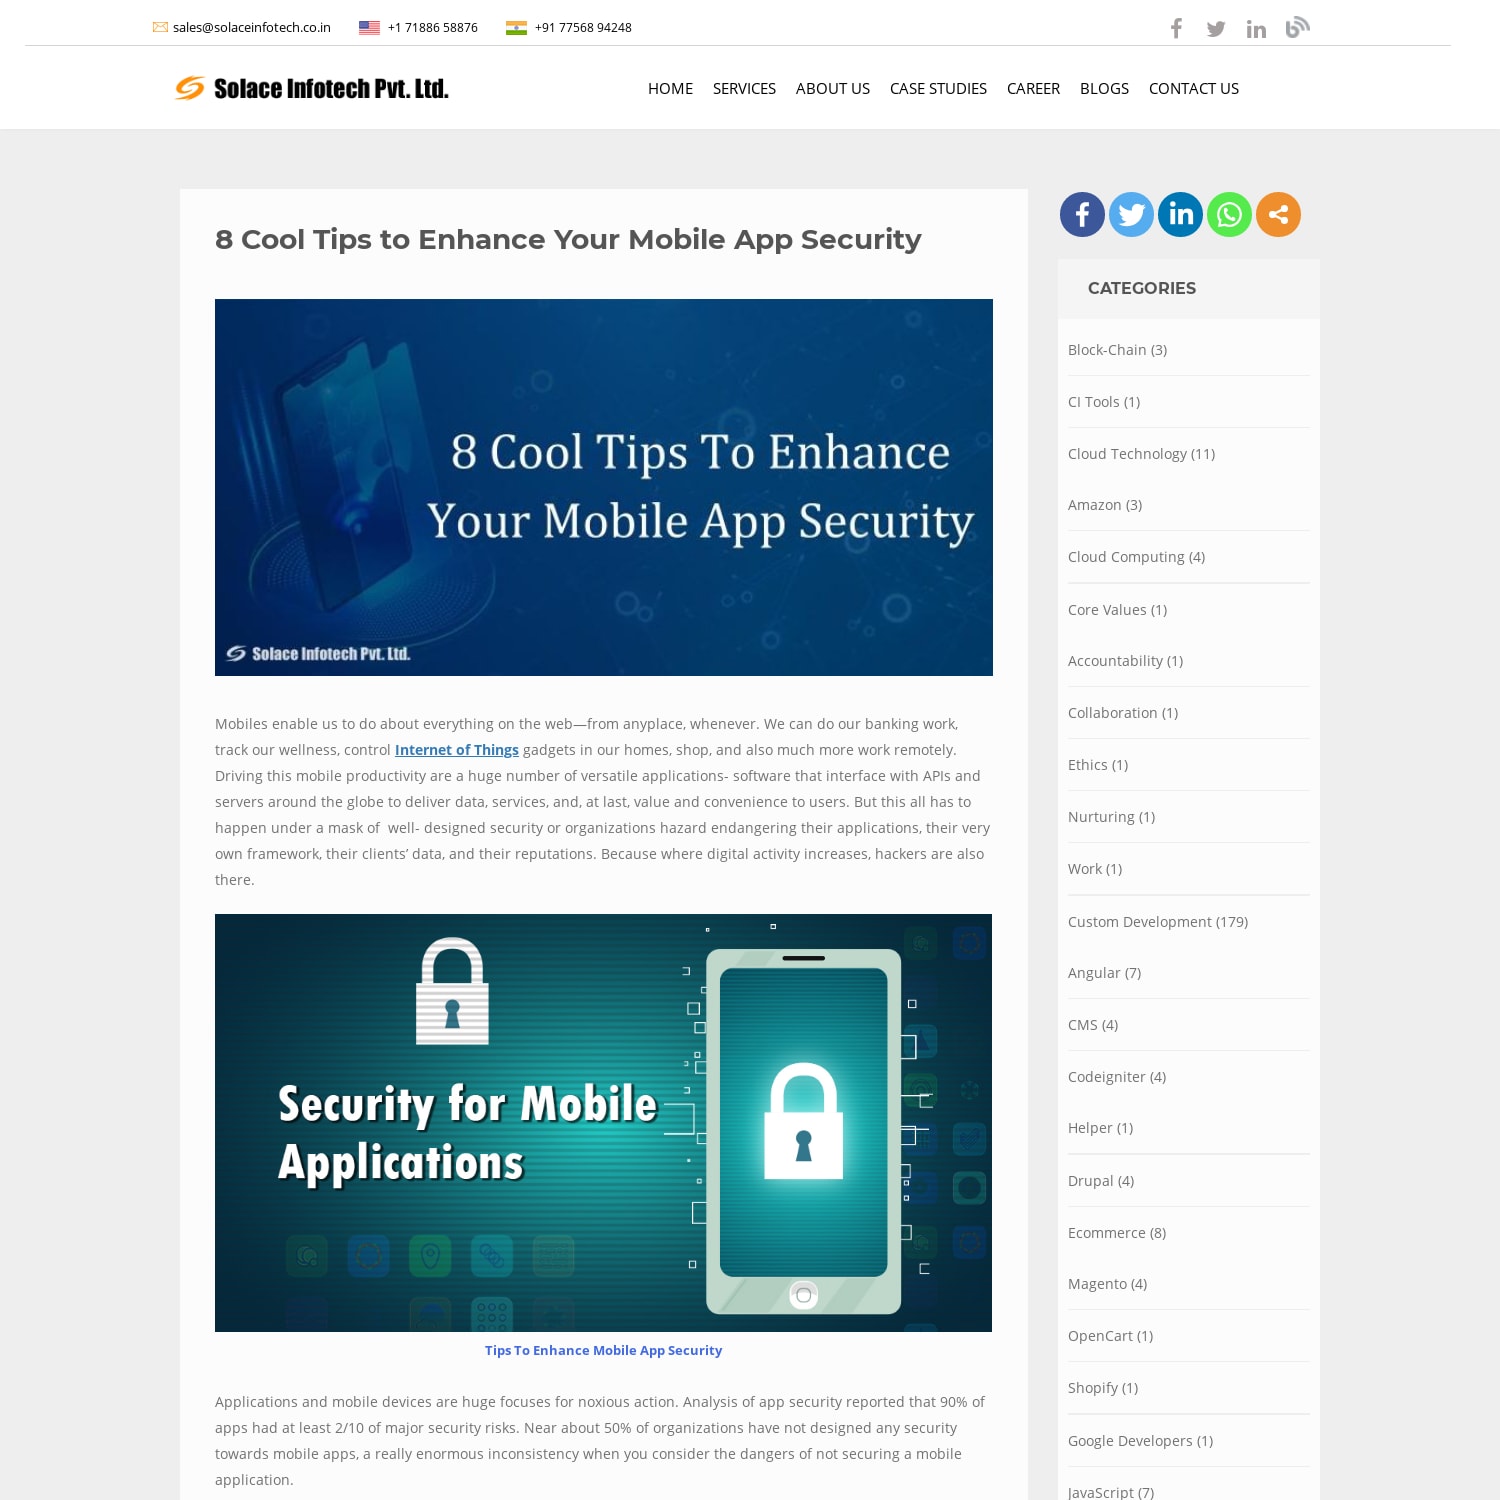 8 Cool Tips to Enhance Your Mobile App Security - Solace Infotech Pvt Ltd